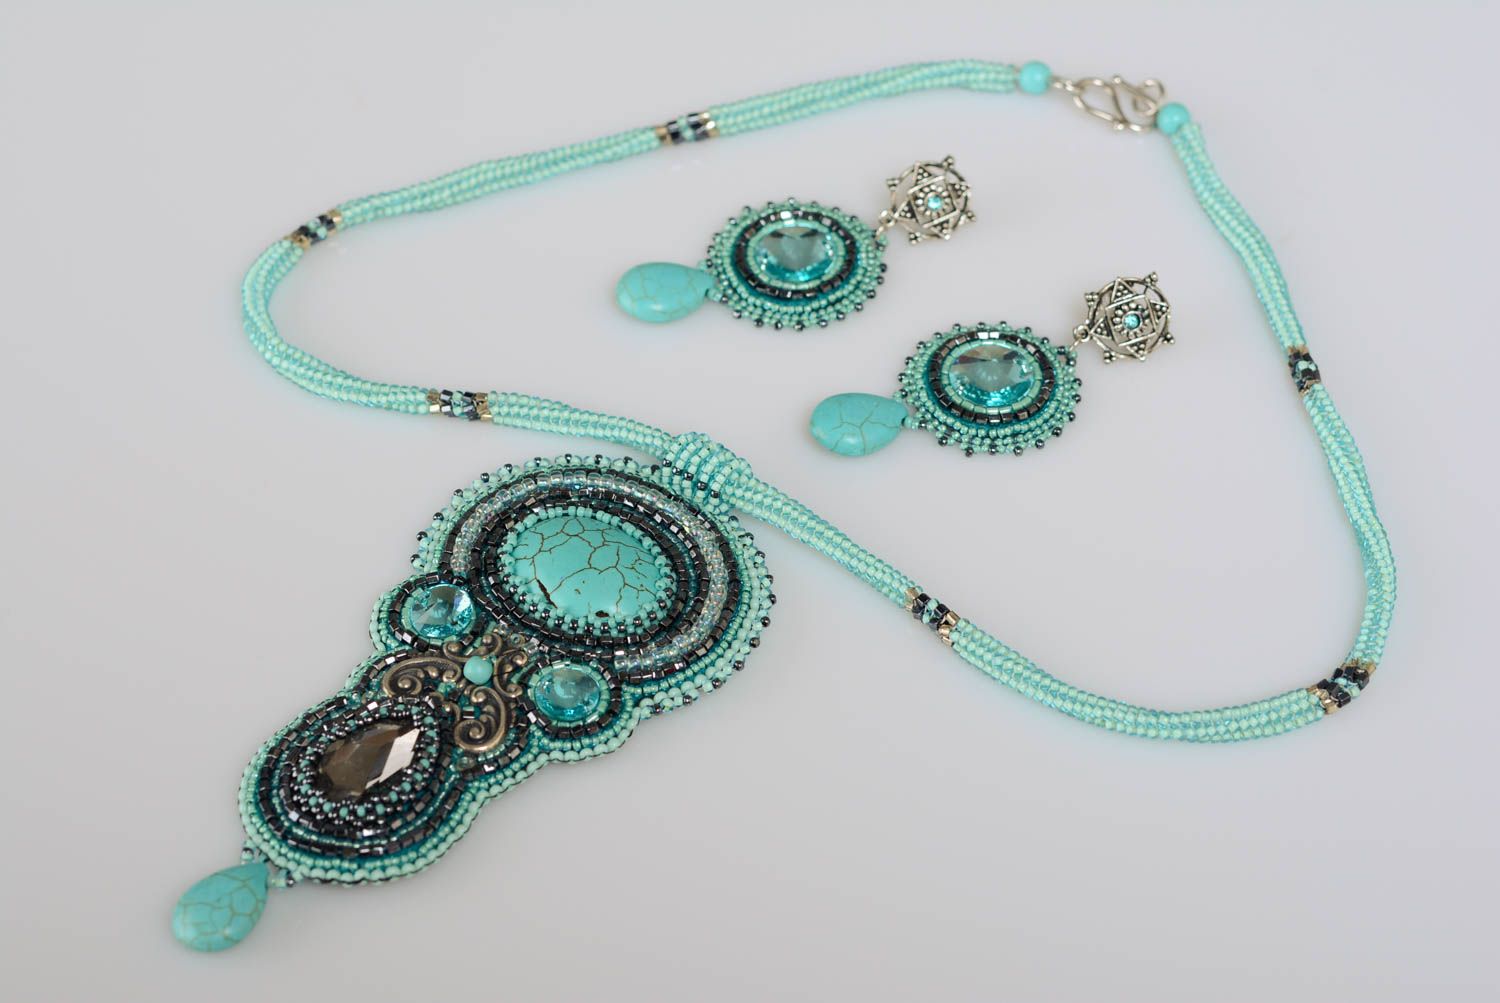 Handmade bead embroidered jewelry with howlite necklace and earrings set of 2 items photo 1